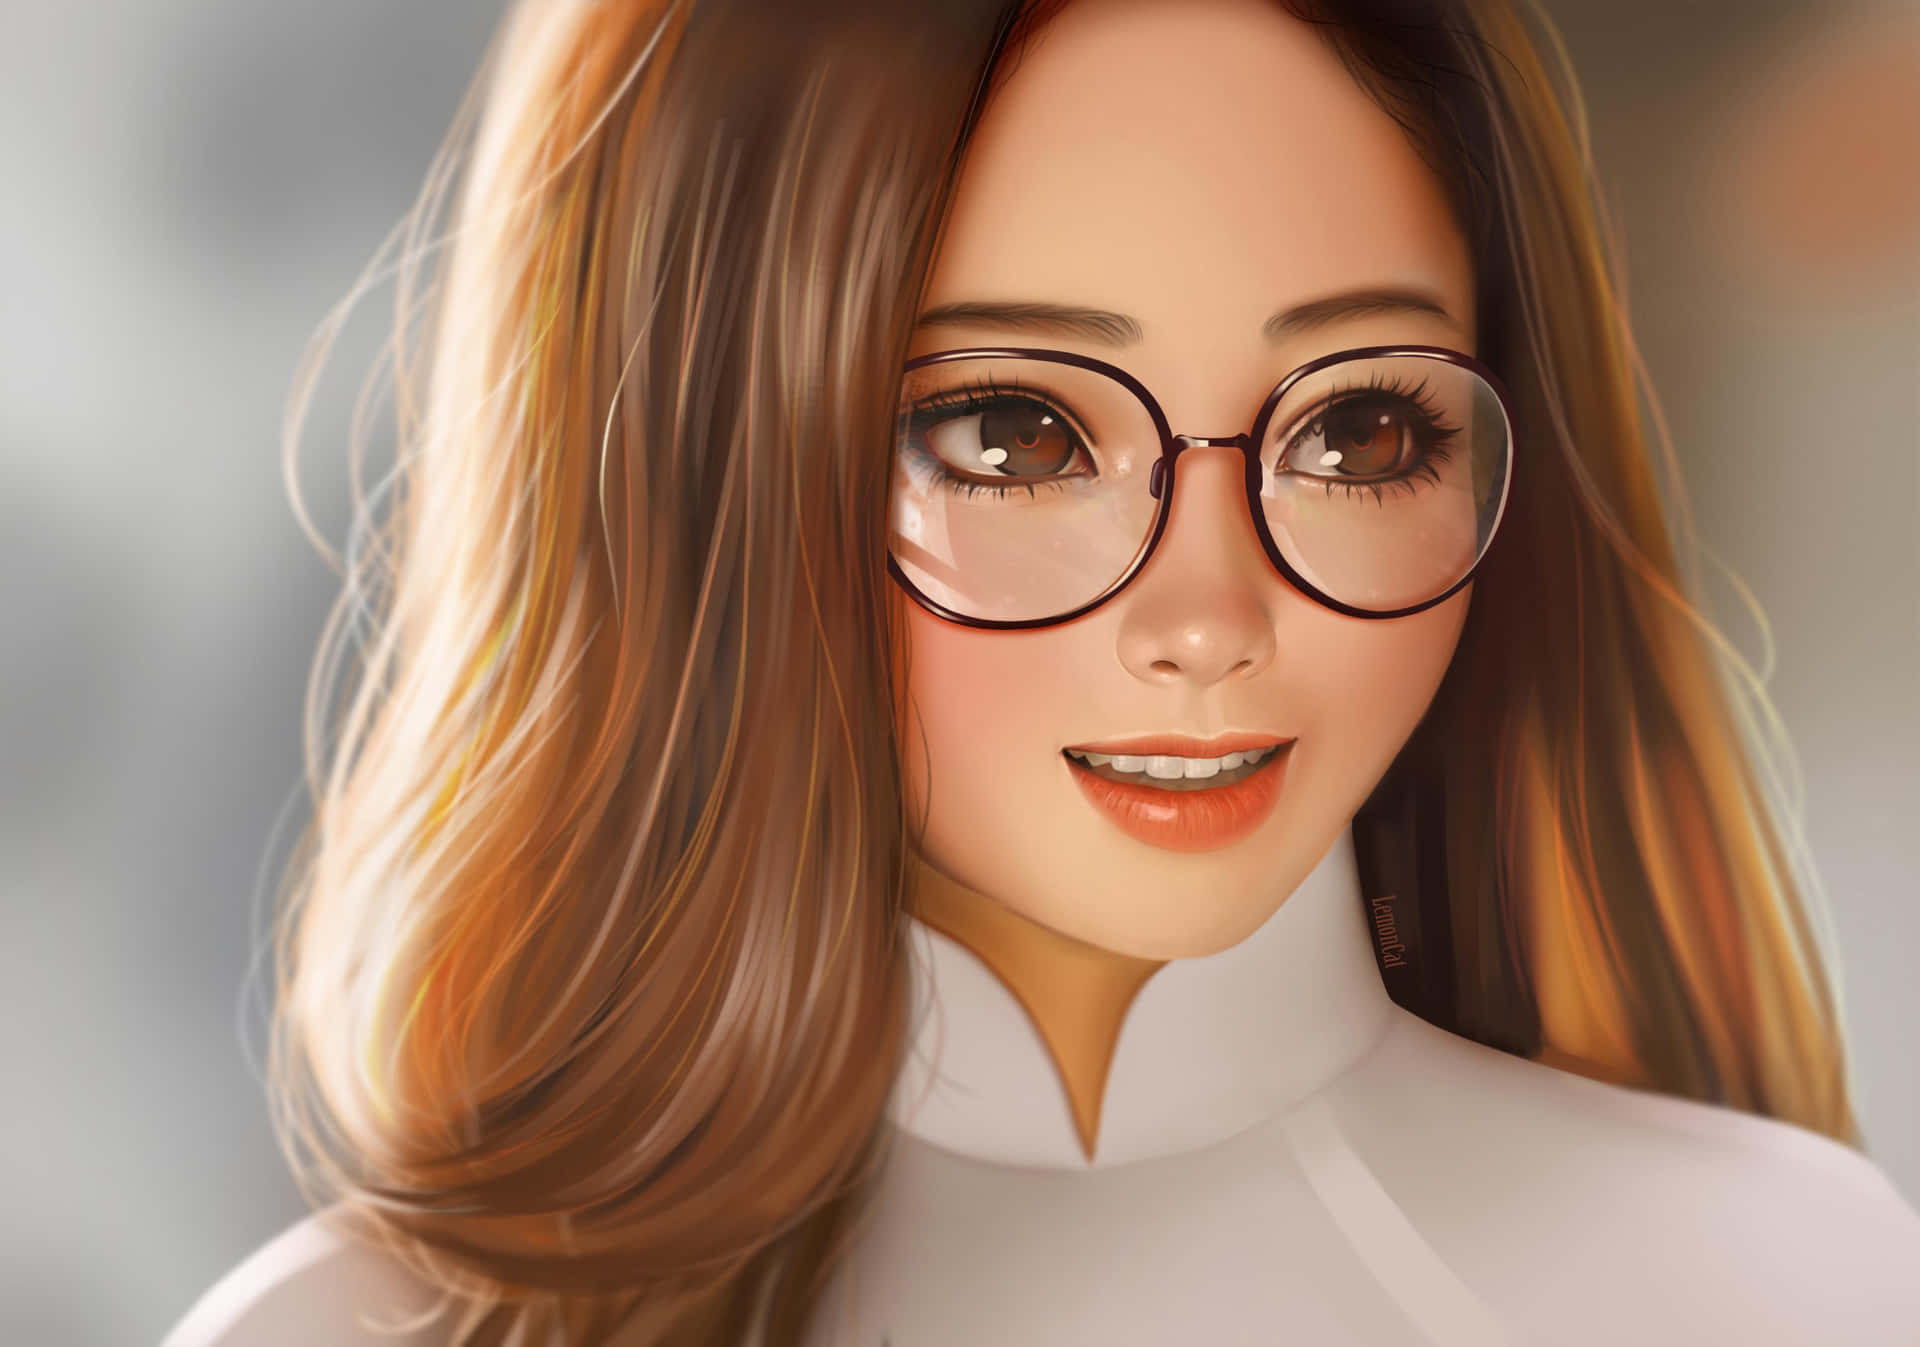 A Girl With Glasses Is Smiling Wallpaper